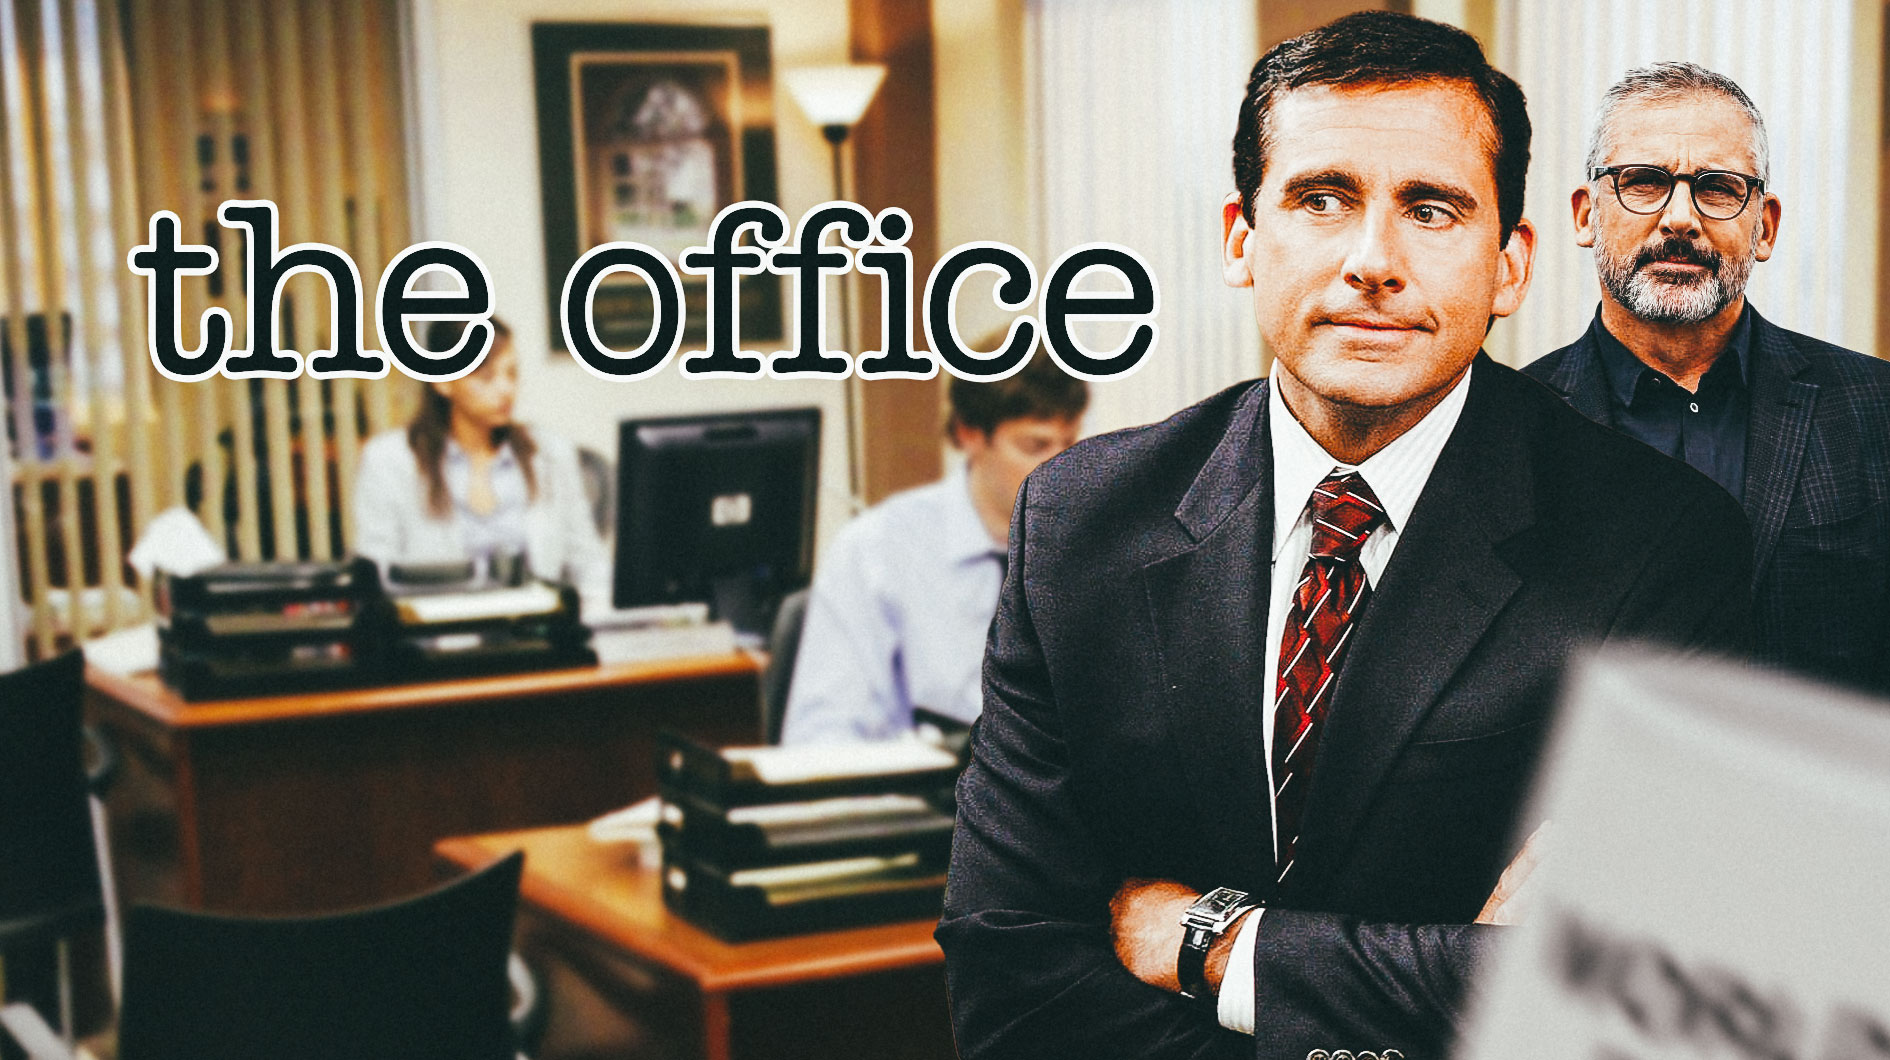 Michael Scott and Steve Carell with The Office logo and Dunder MIfflin background.